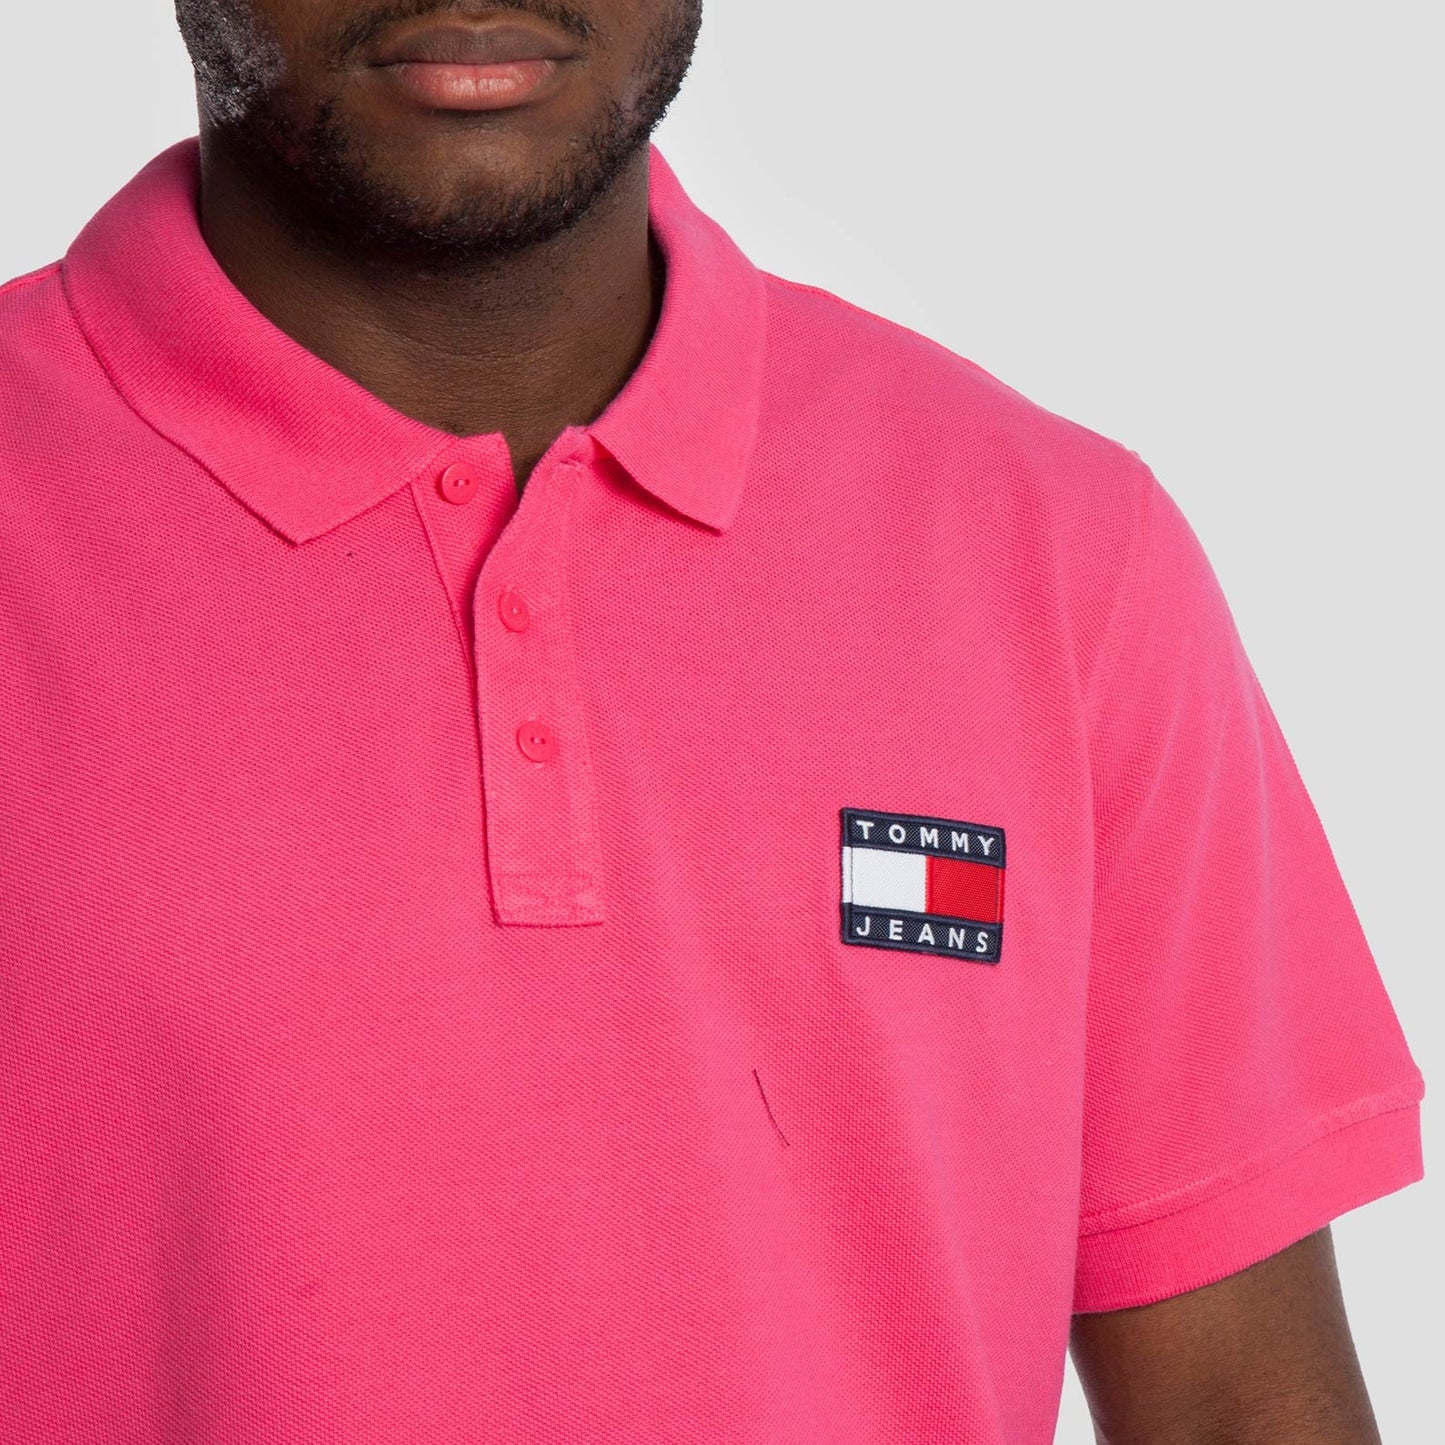 Tommy Jeans Polo Badge - DM0DM10327-T1K - Colección Chico